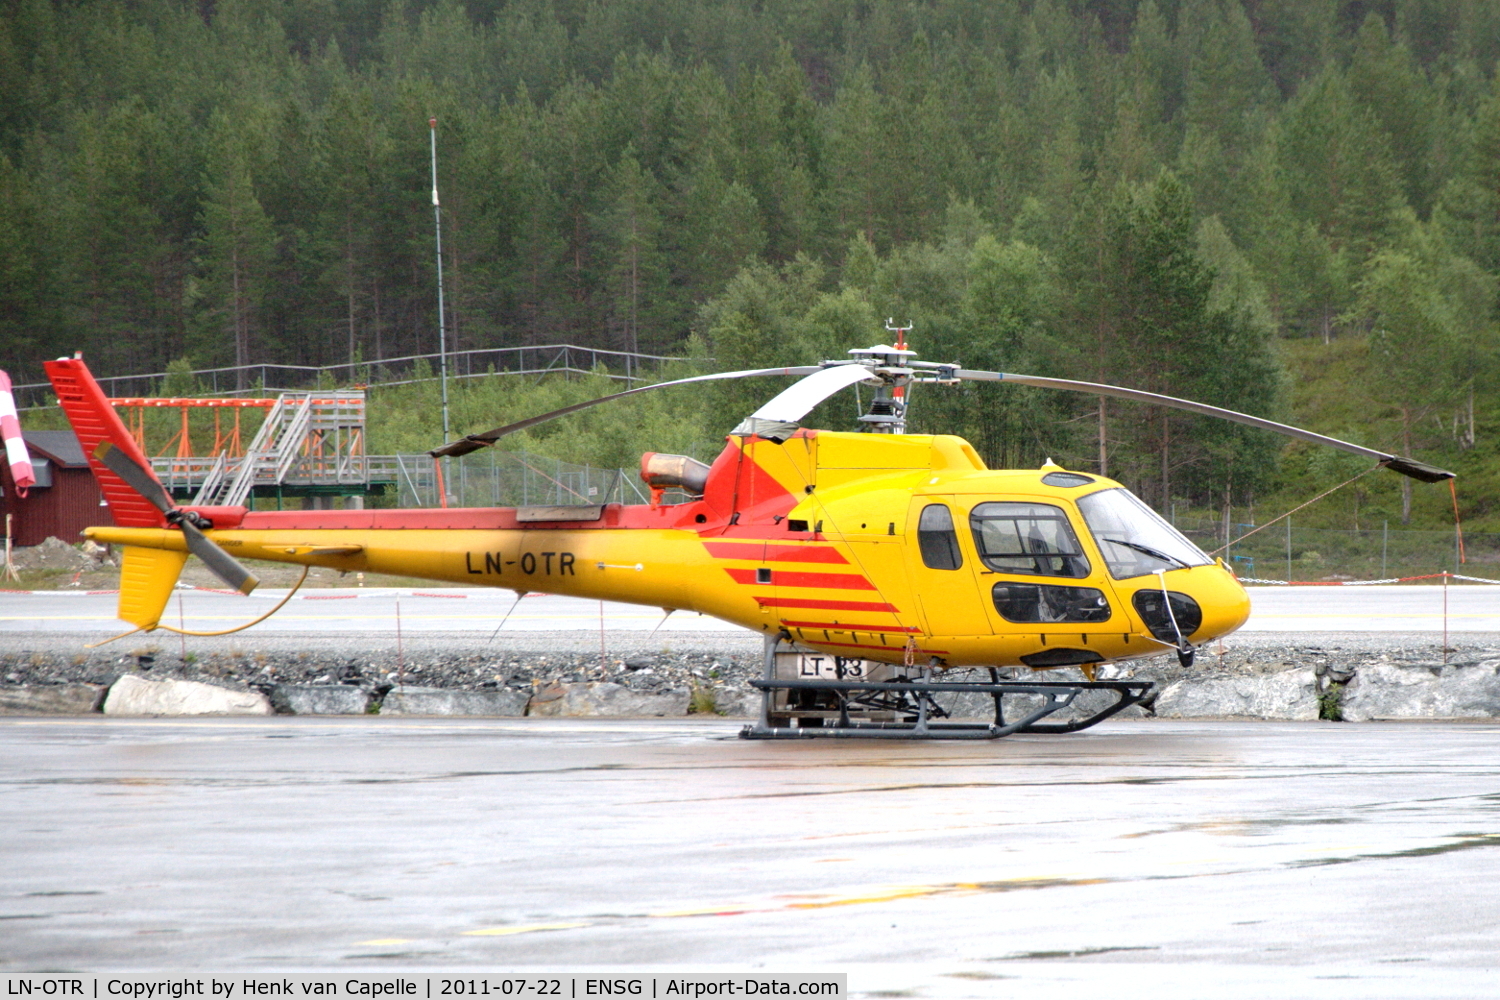 LN-OTR, 2000 Eurocopter AS-350B-3 Ecureuil Ecureuil C/N 4751, Ecureuil helicopter on the platform of Sogndal airport, Norway.